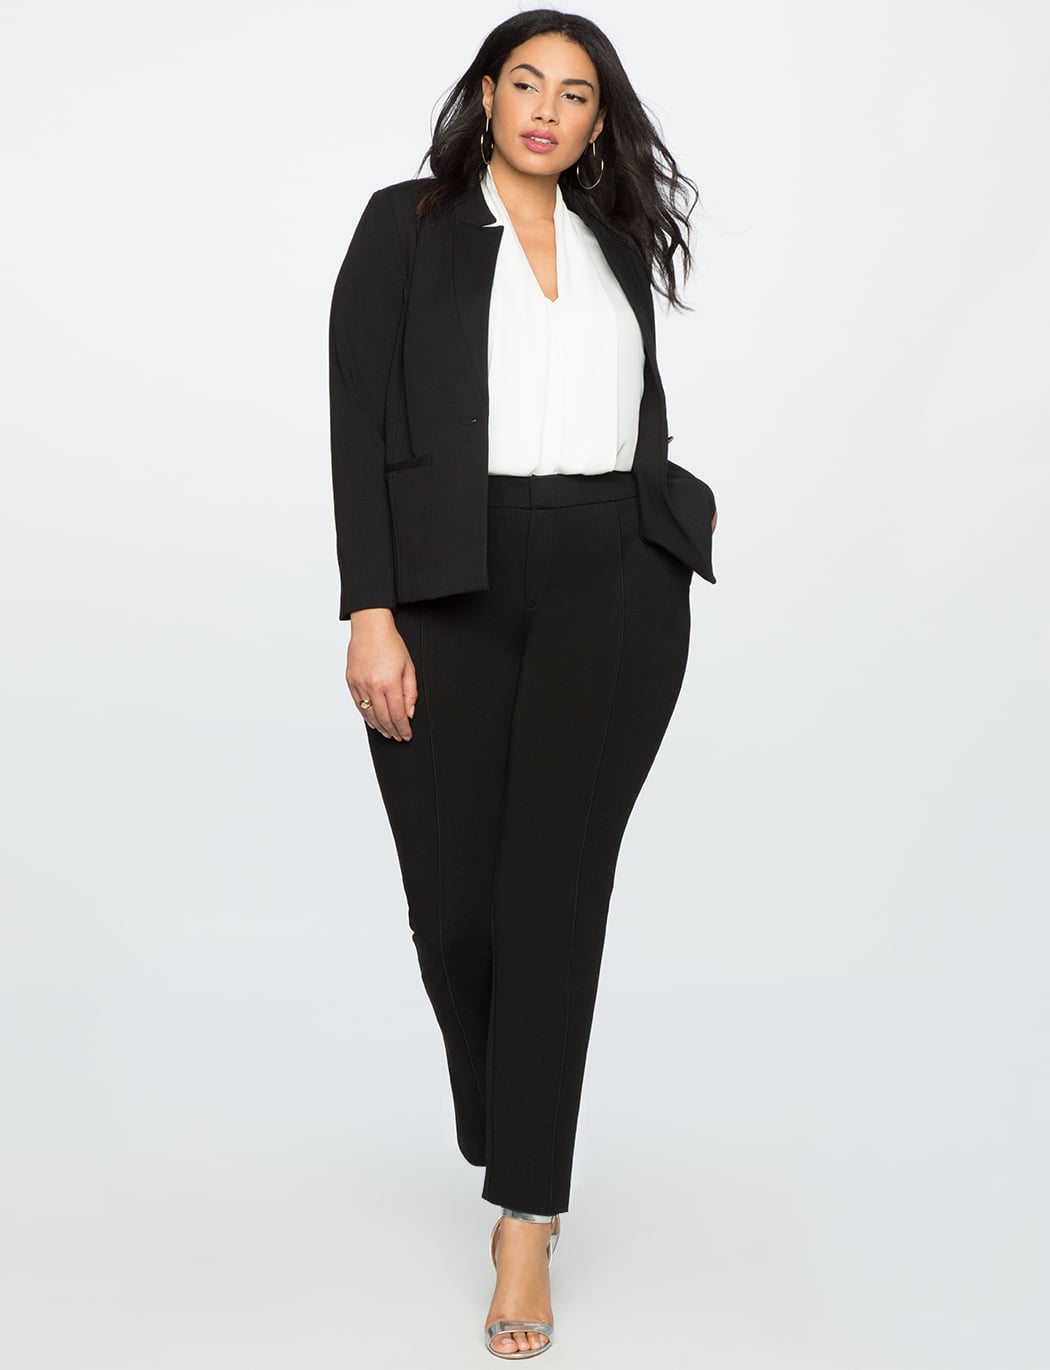 The Best Plus Size Work Clothes For Women